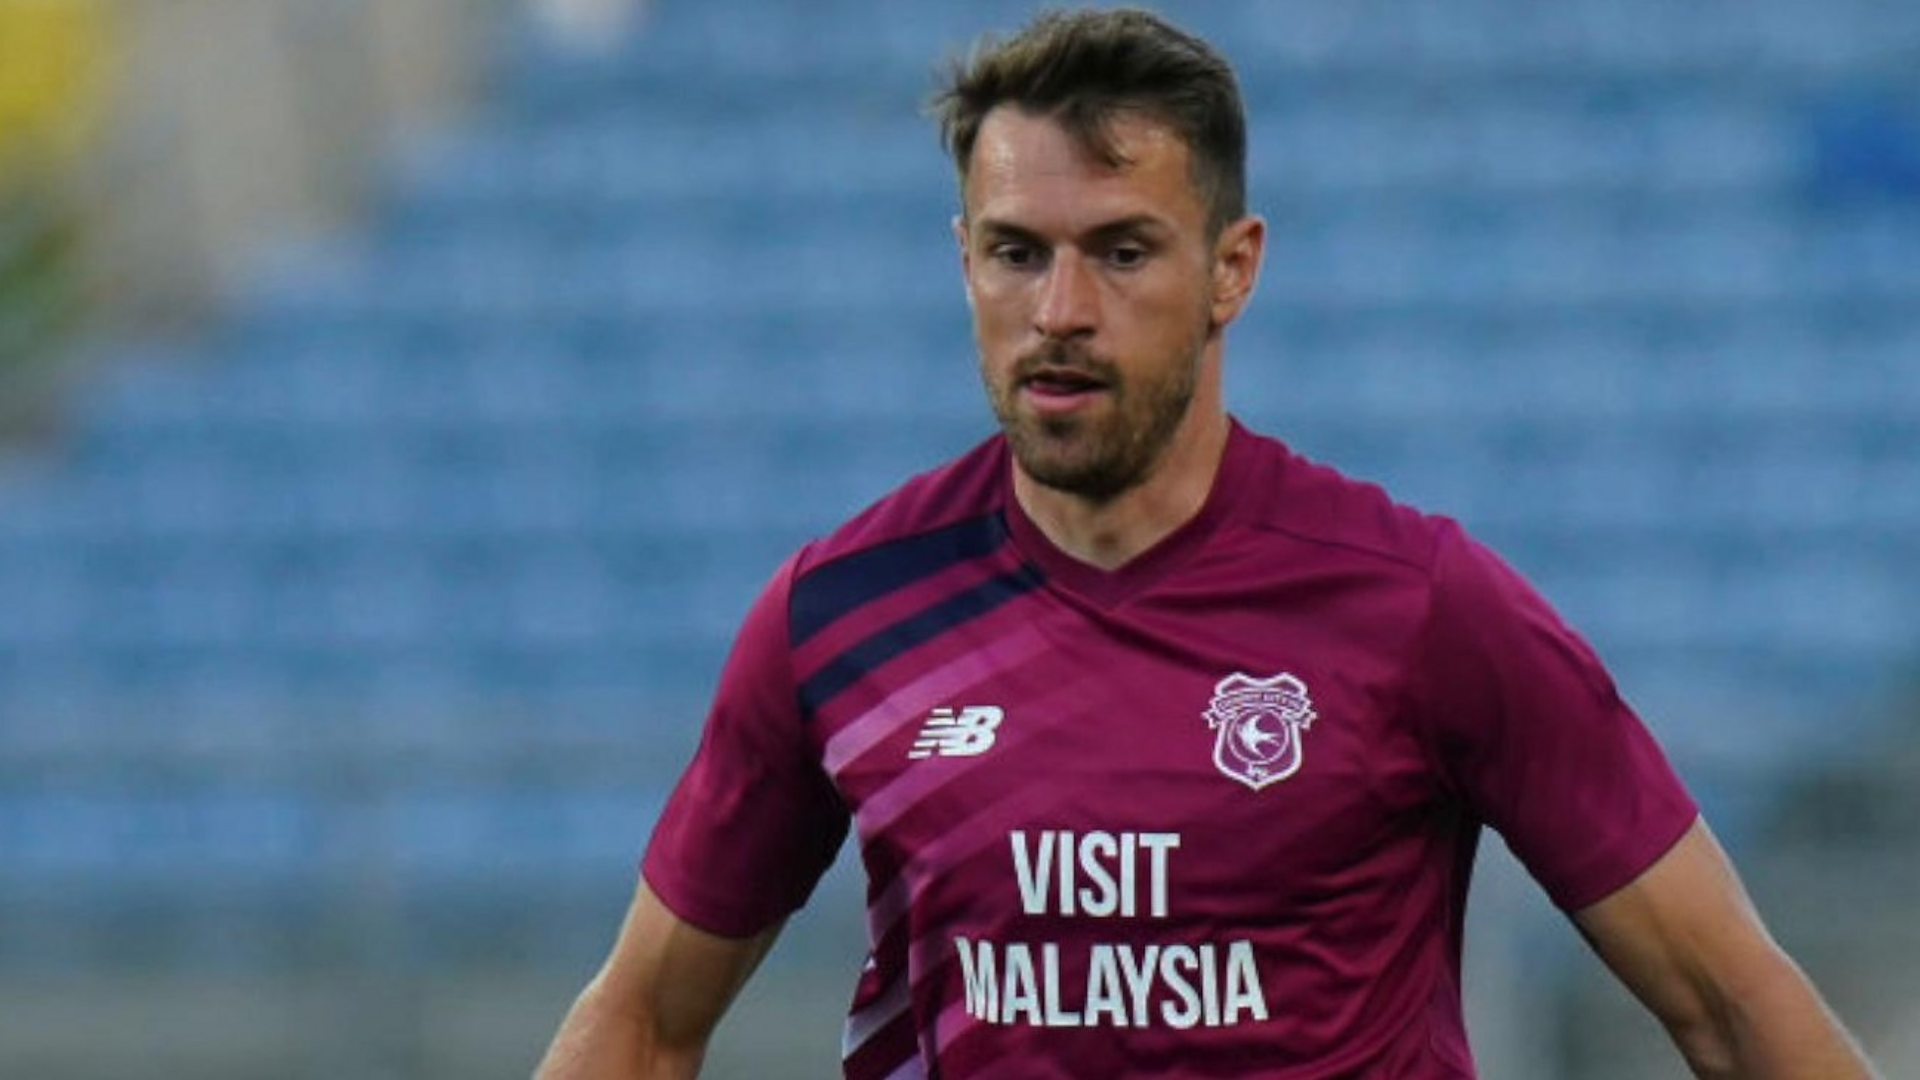 Big Aaron Ramsey news may benefit one Cardiff City player